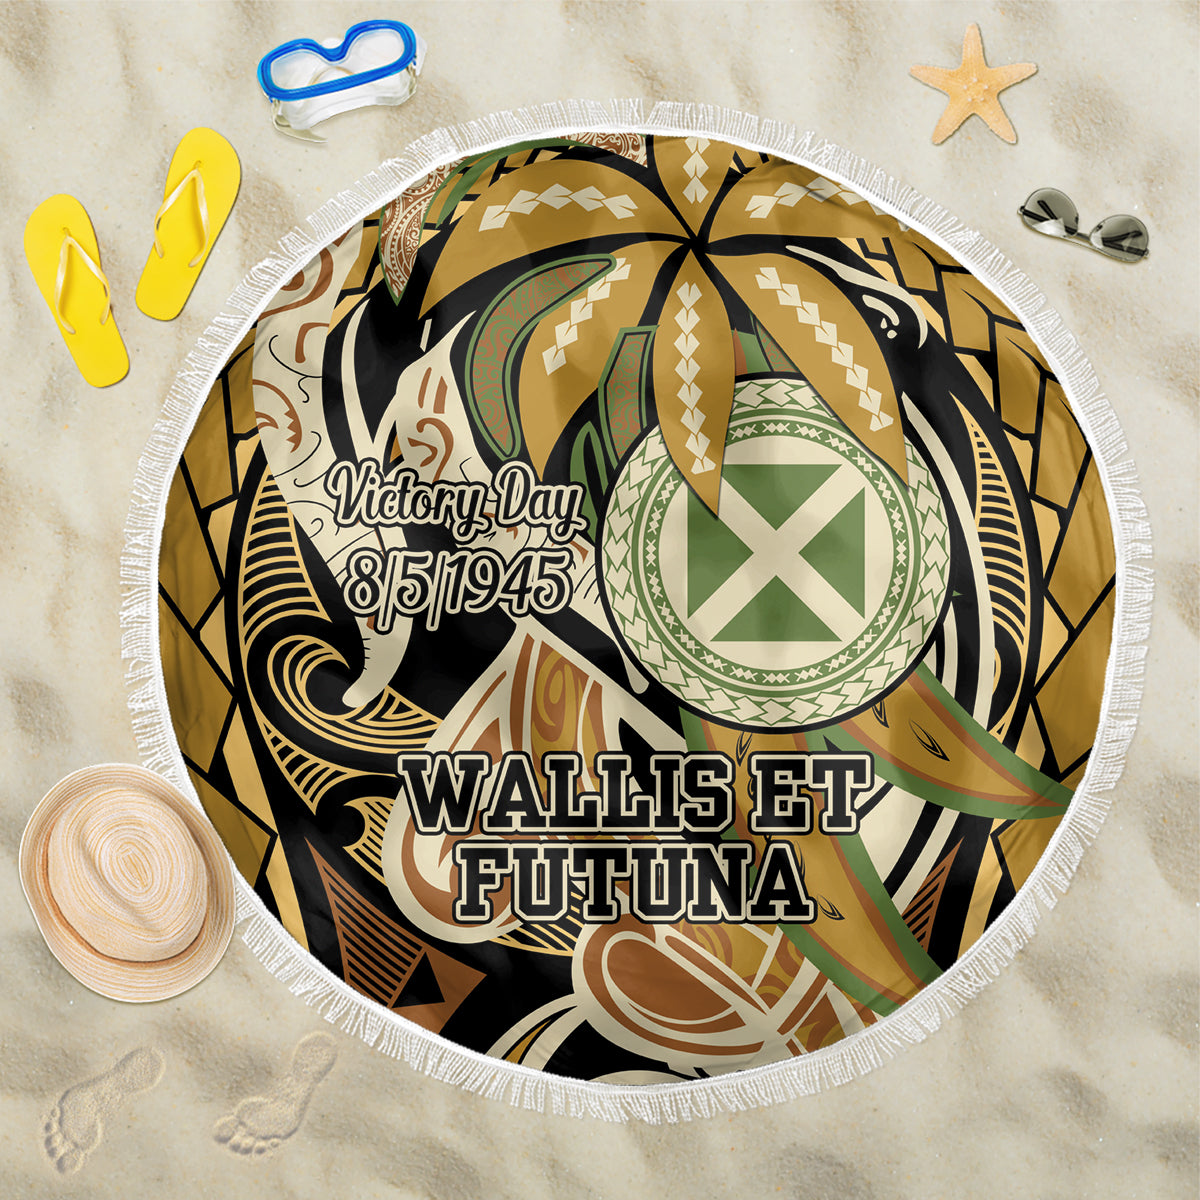 Wallis and Futuna Victory Day Beach Blanket Since 1945 with Polynesian Platinum Floral Tribal